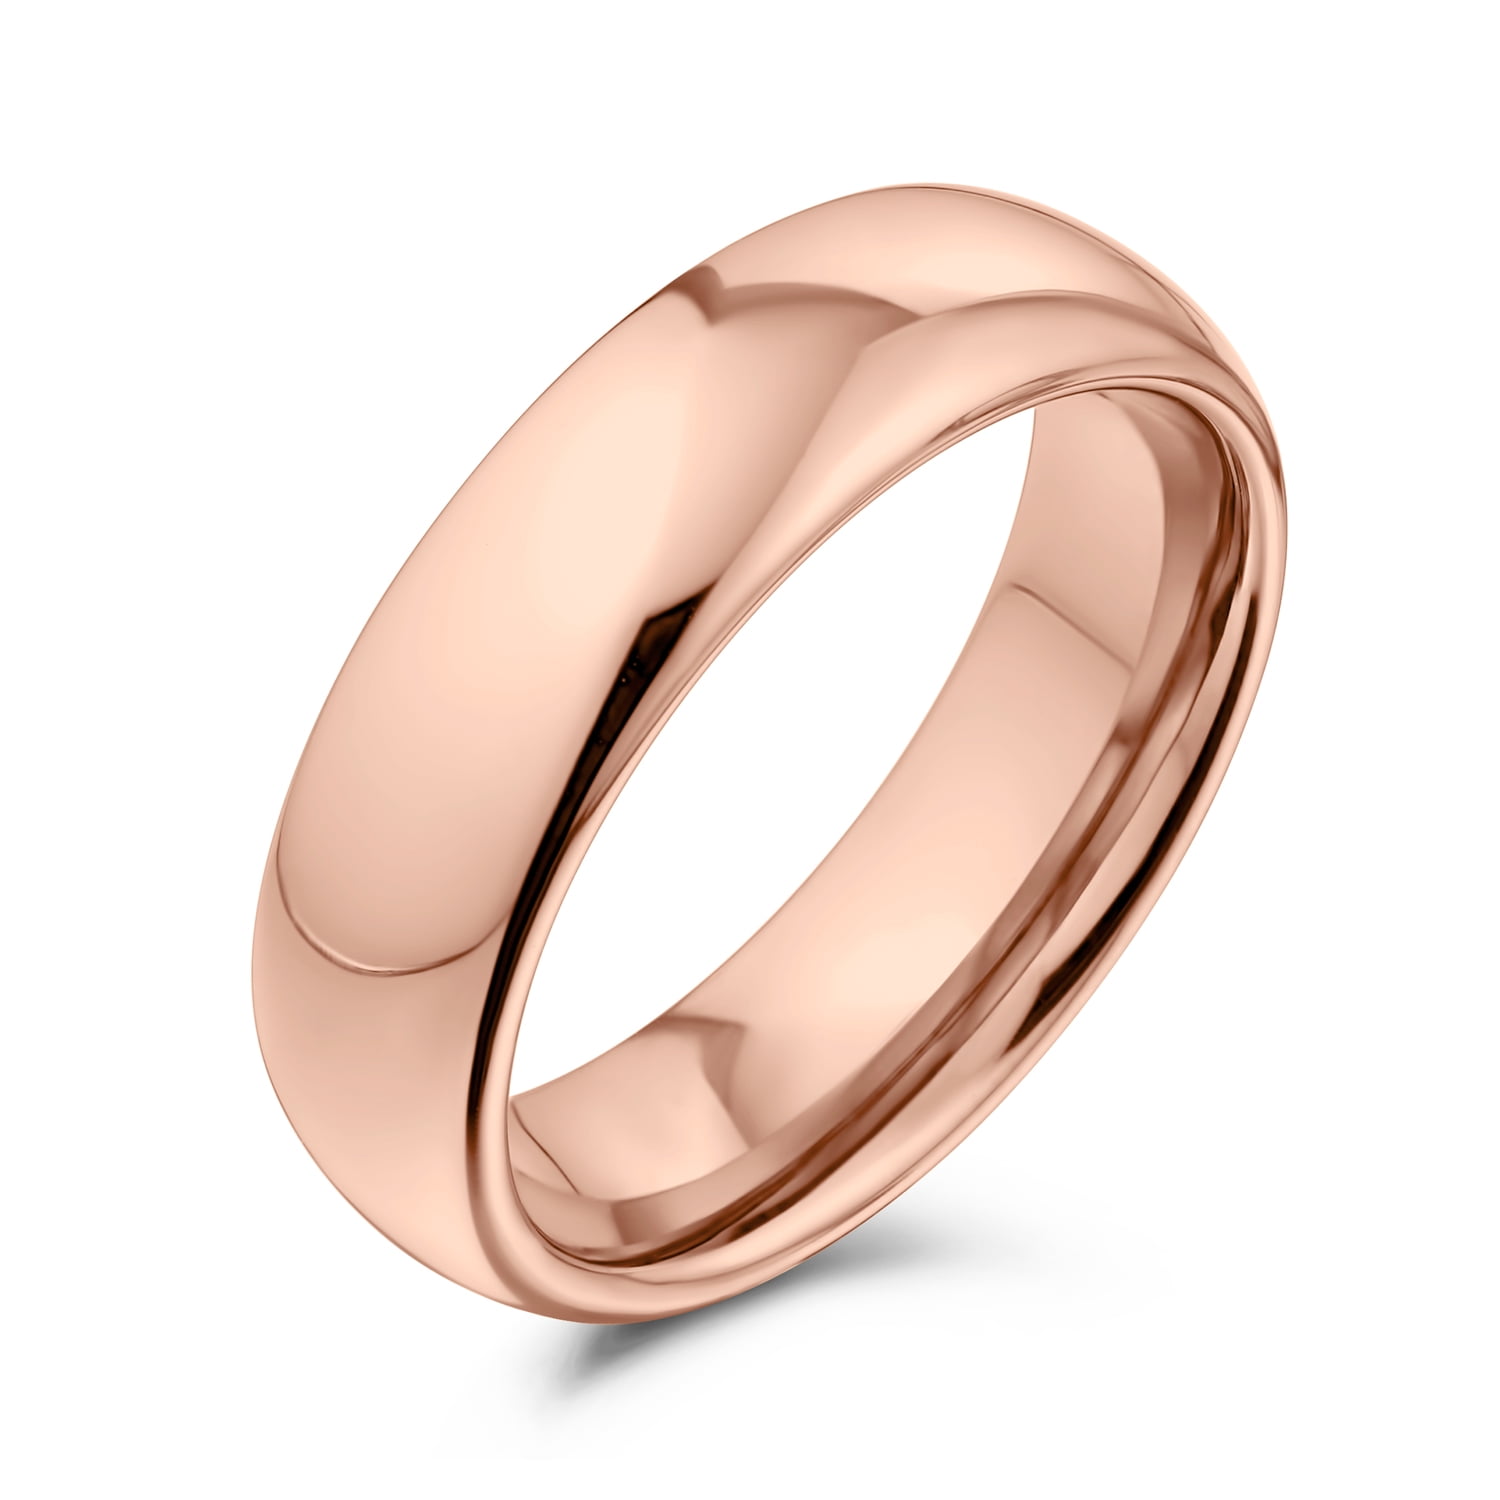 18ct RED ROSE GOLD 3mm 6mm COURT COMFORT FIT HEAVY WEIGHT WEDDING RING BAND 